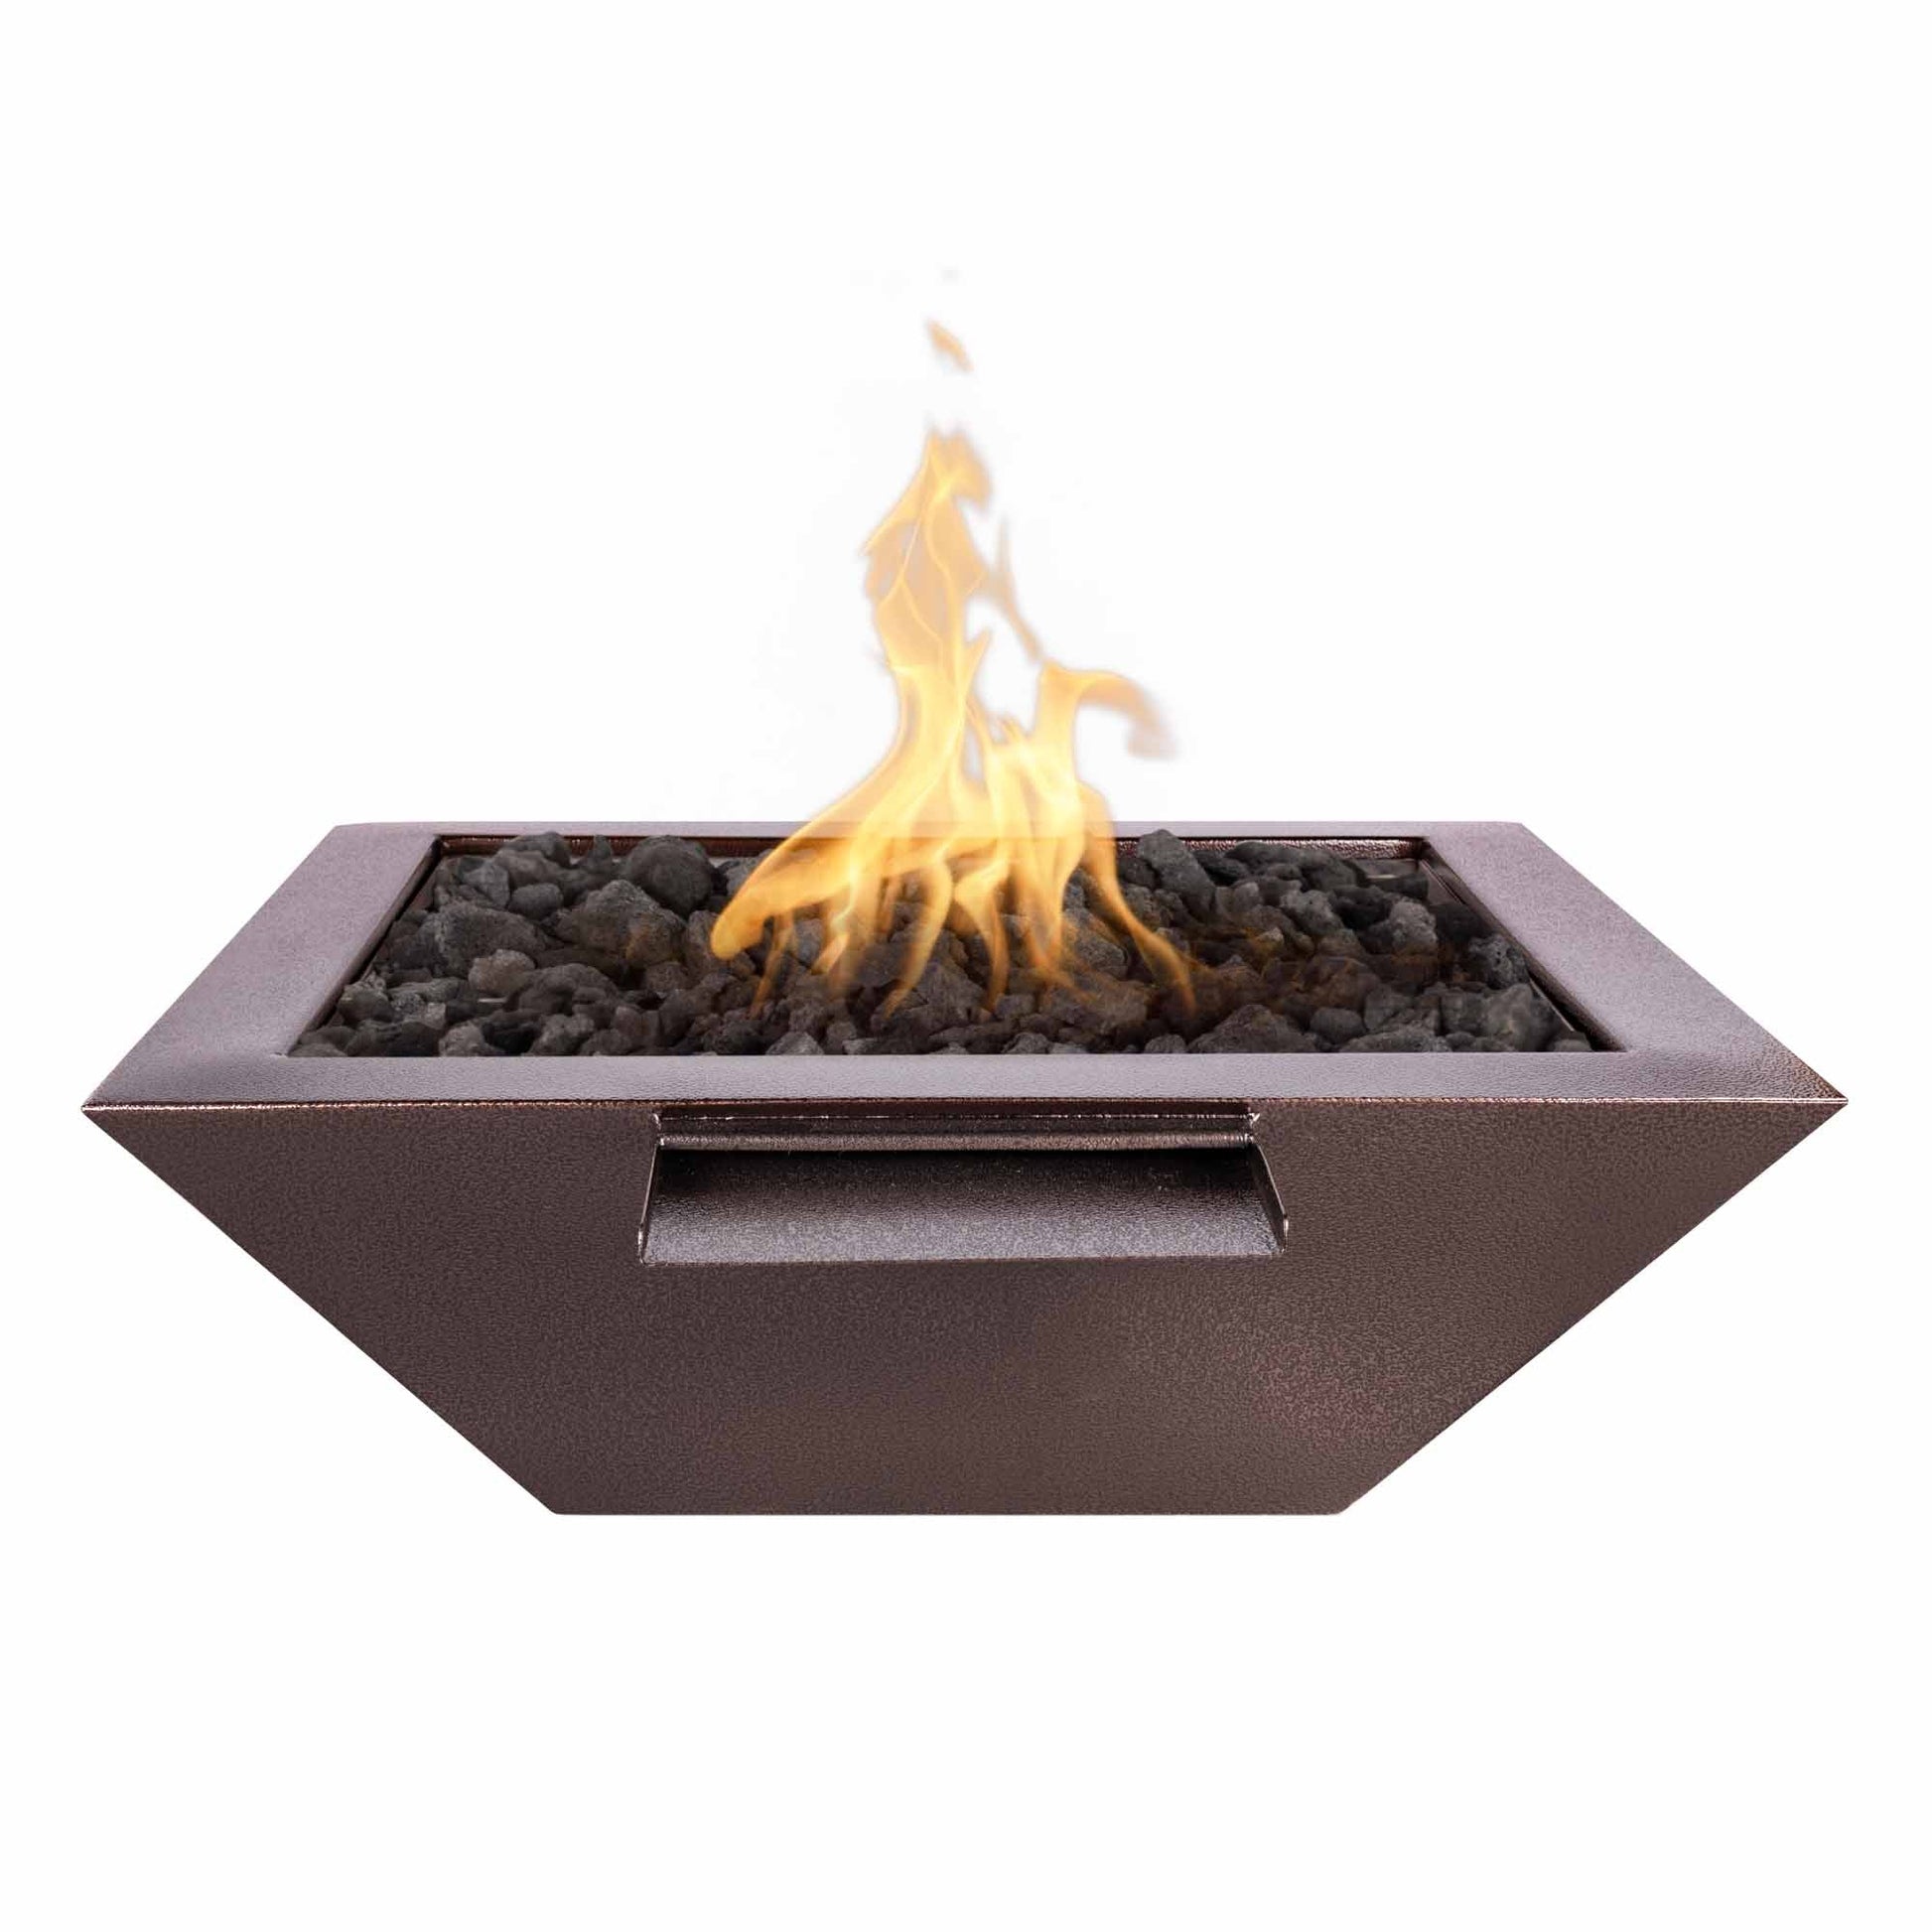 The Outdoor Plus Square Maya 36" Black Powder Coated Metal Liquid Propane Fire Bowl with Match Lit with Flame Sense Ignition